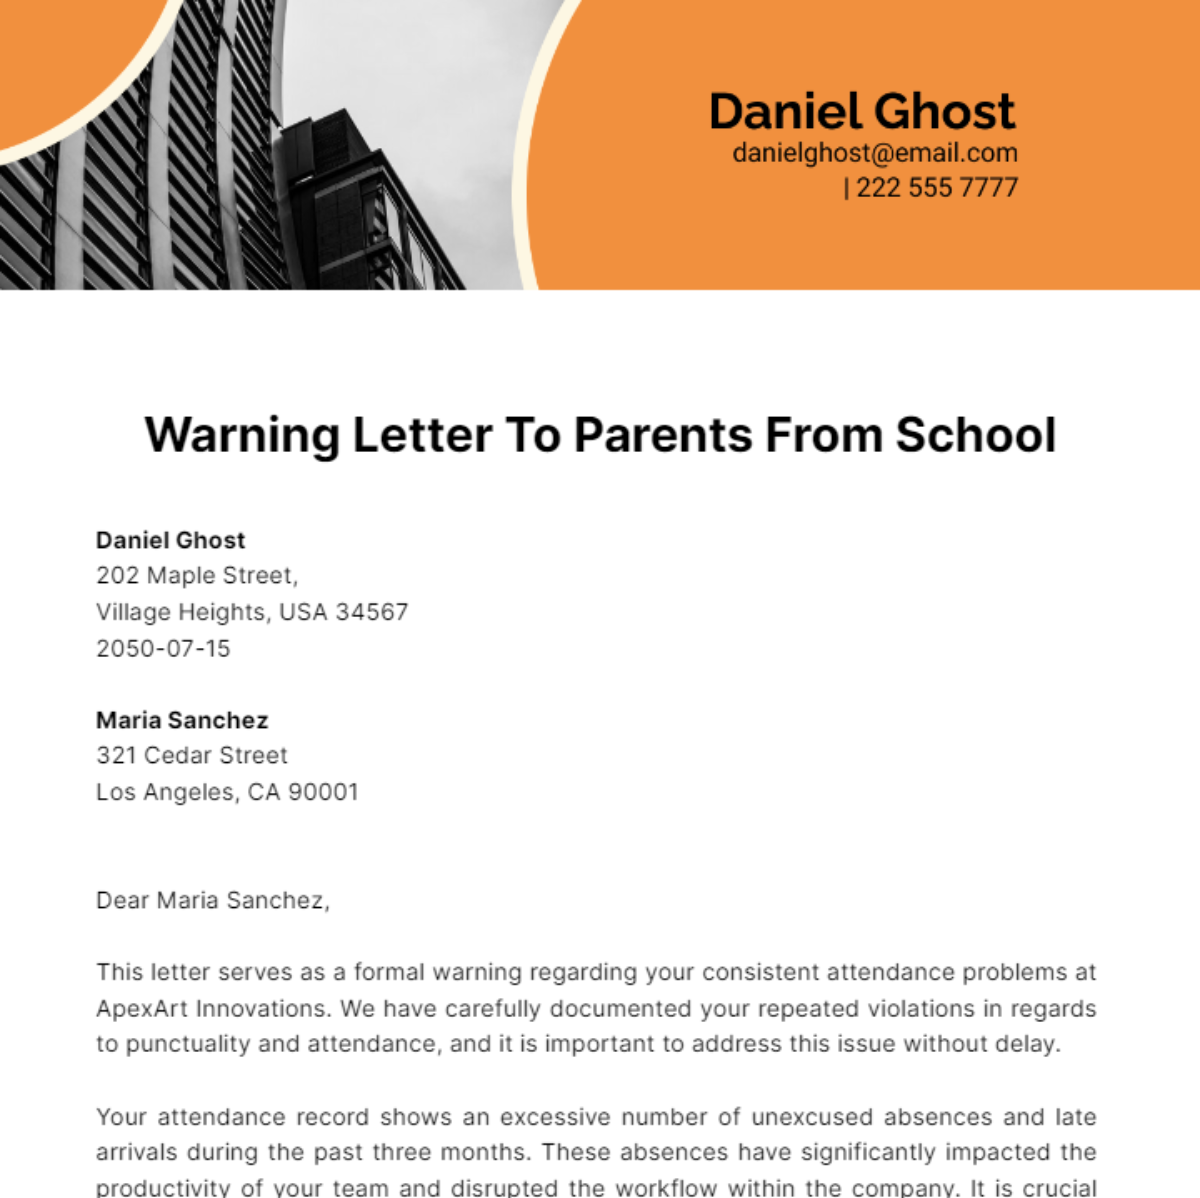 Warning Letter To Parents From School Template